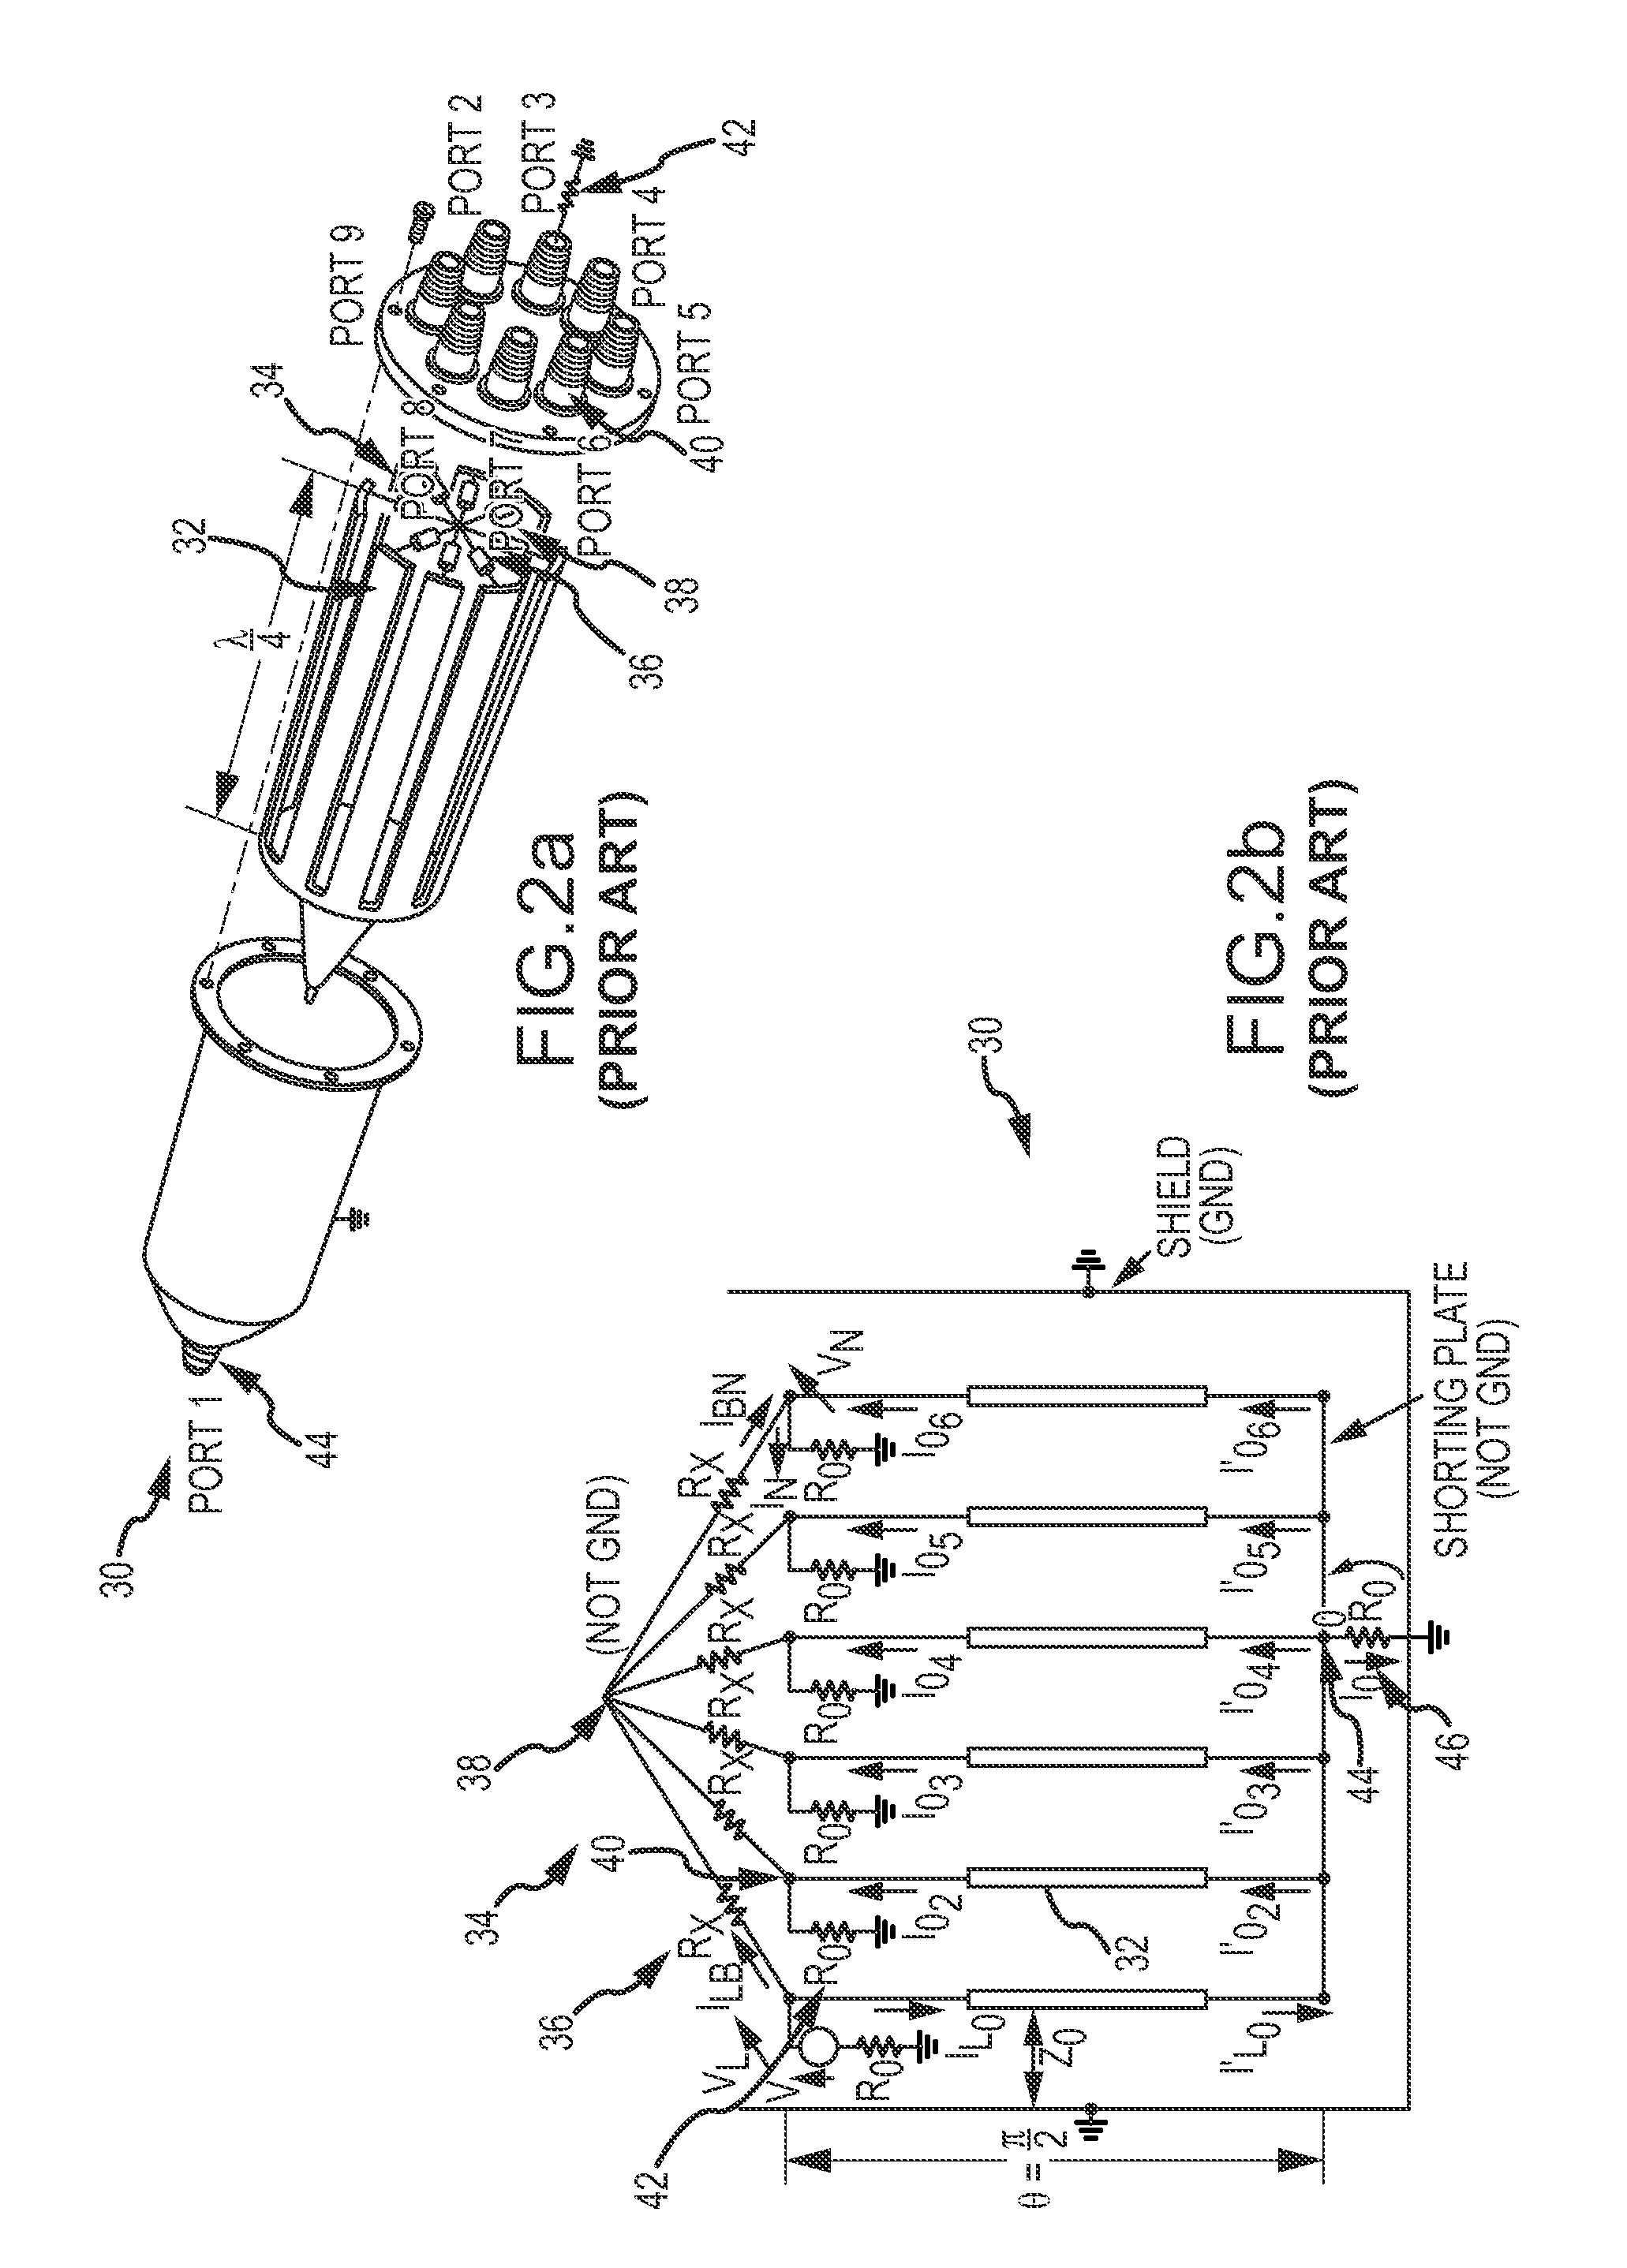 Multi-Layer Radial Power Divider/Combiner